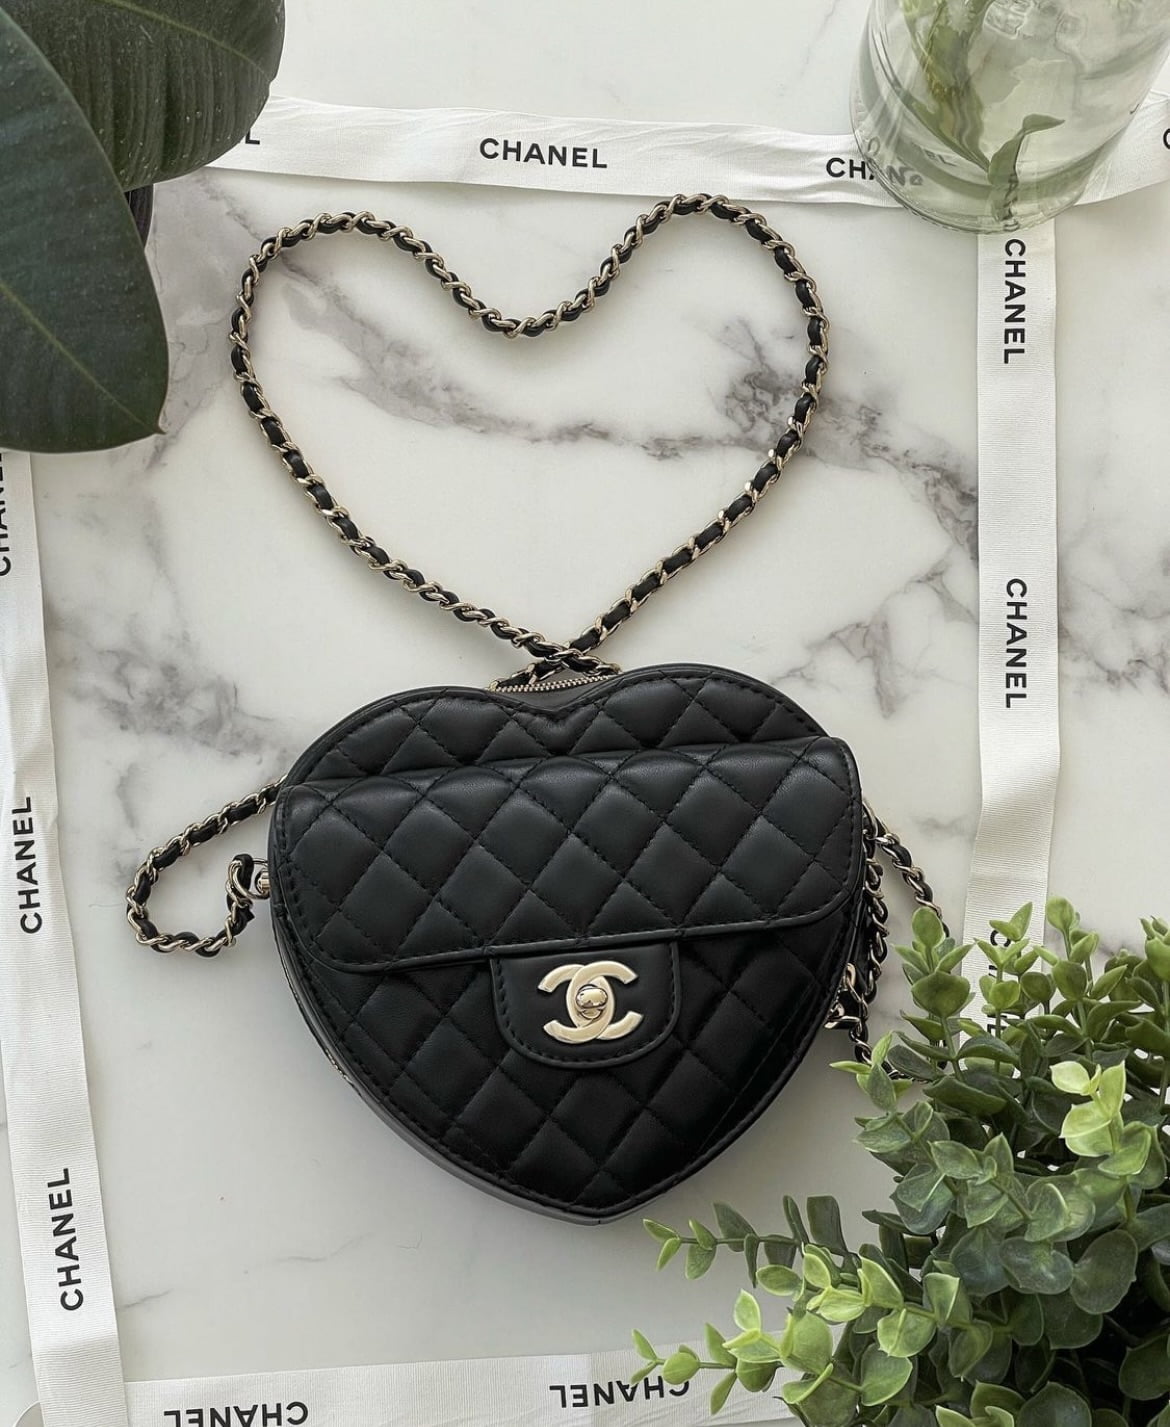 The Chanel Heart Bag, Bags for Breakfast